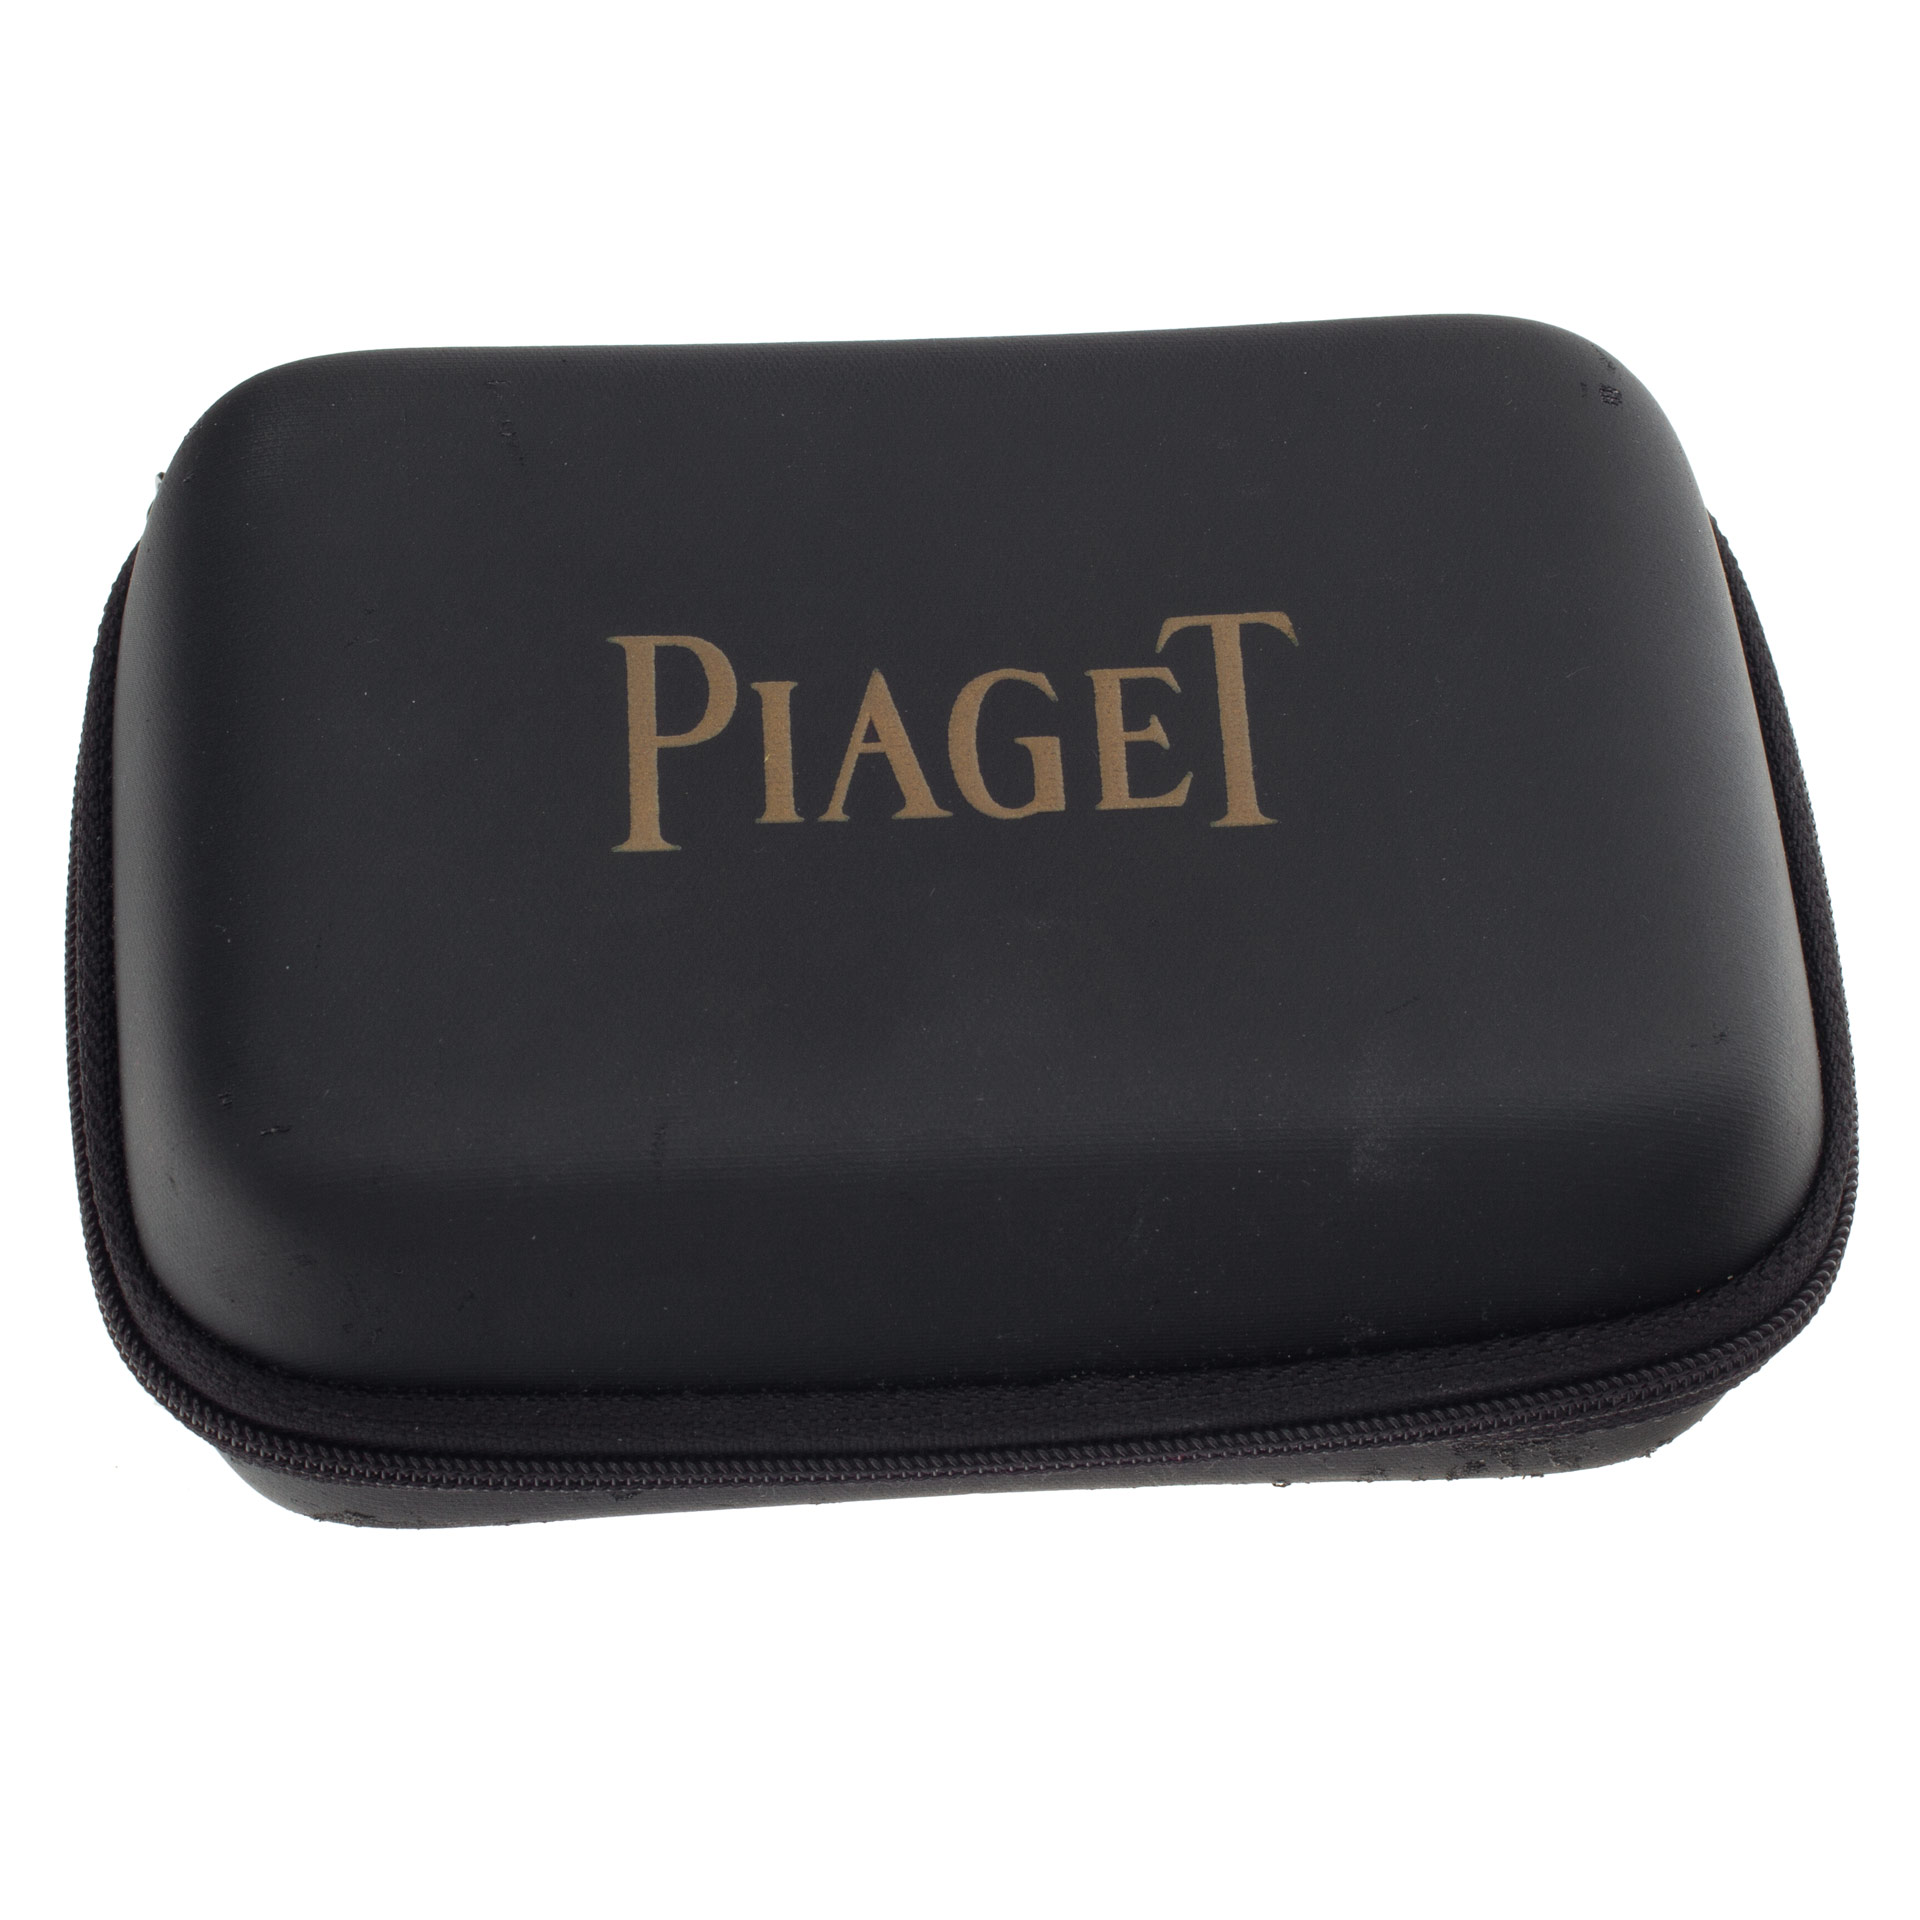 Piaget Polo 23mm 7131g4 image 6